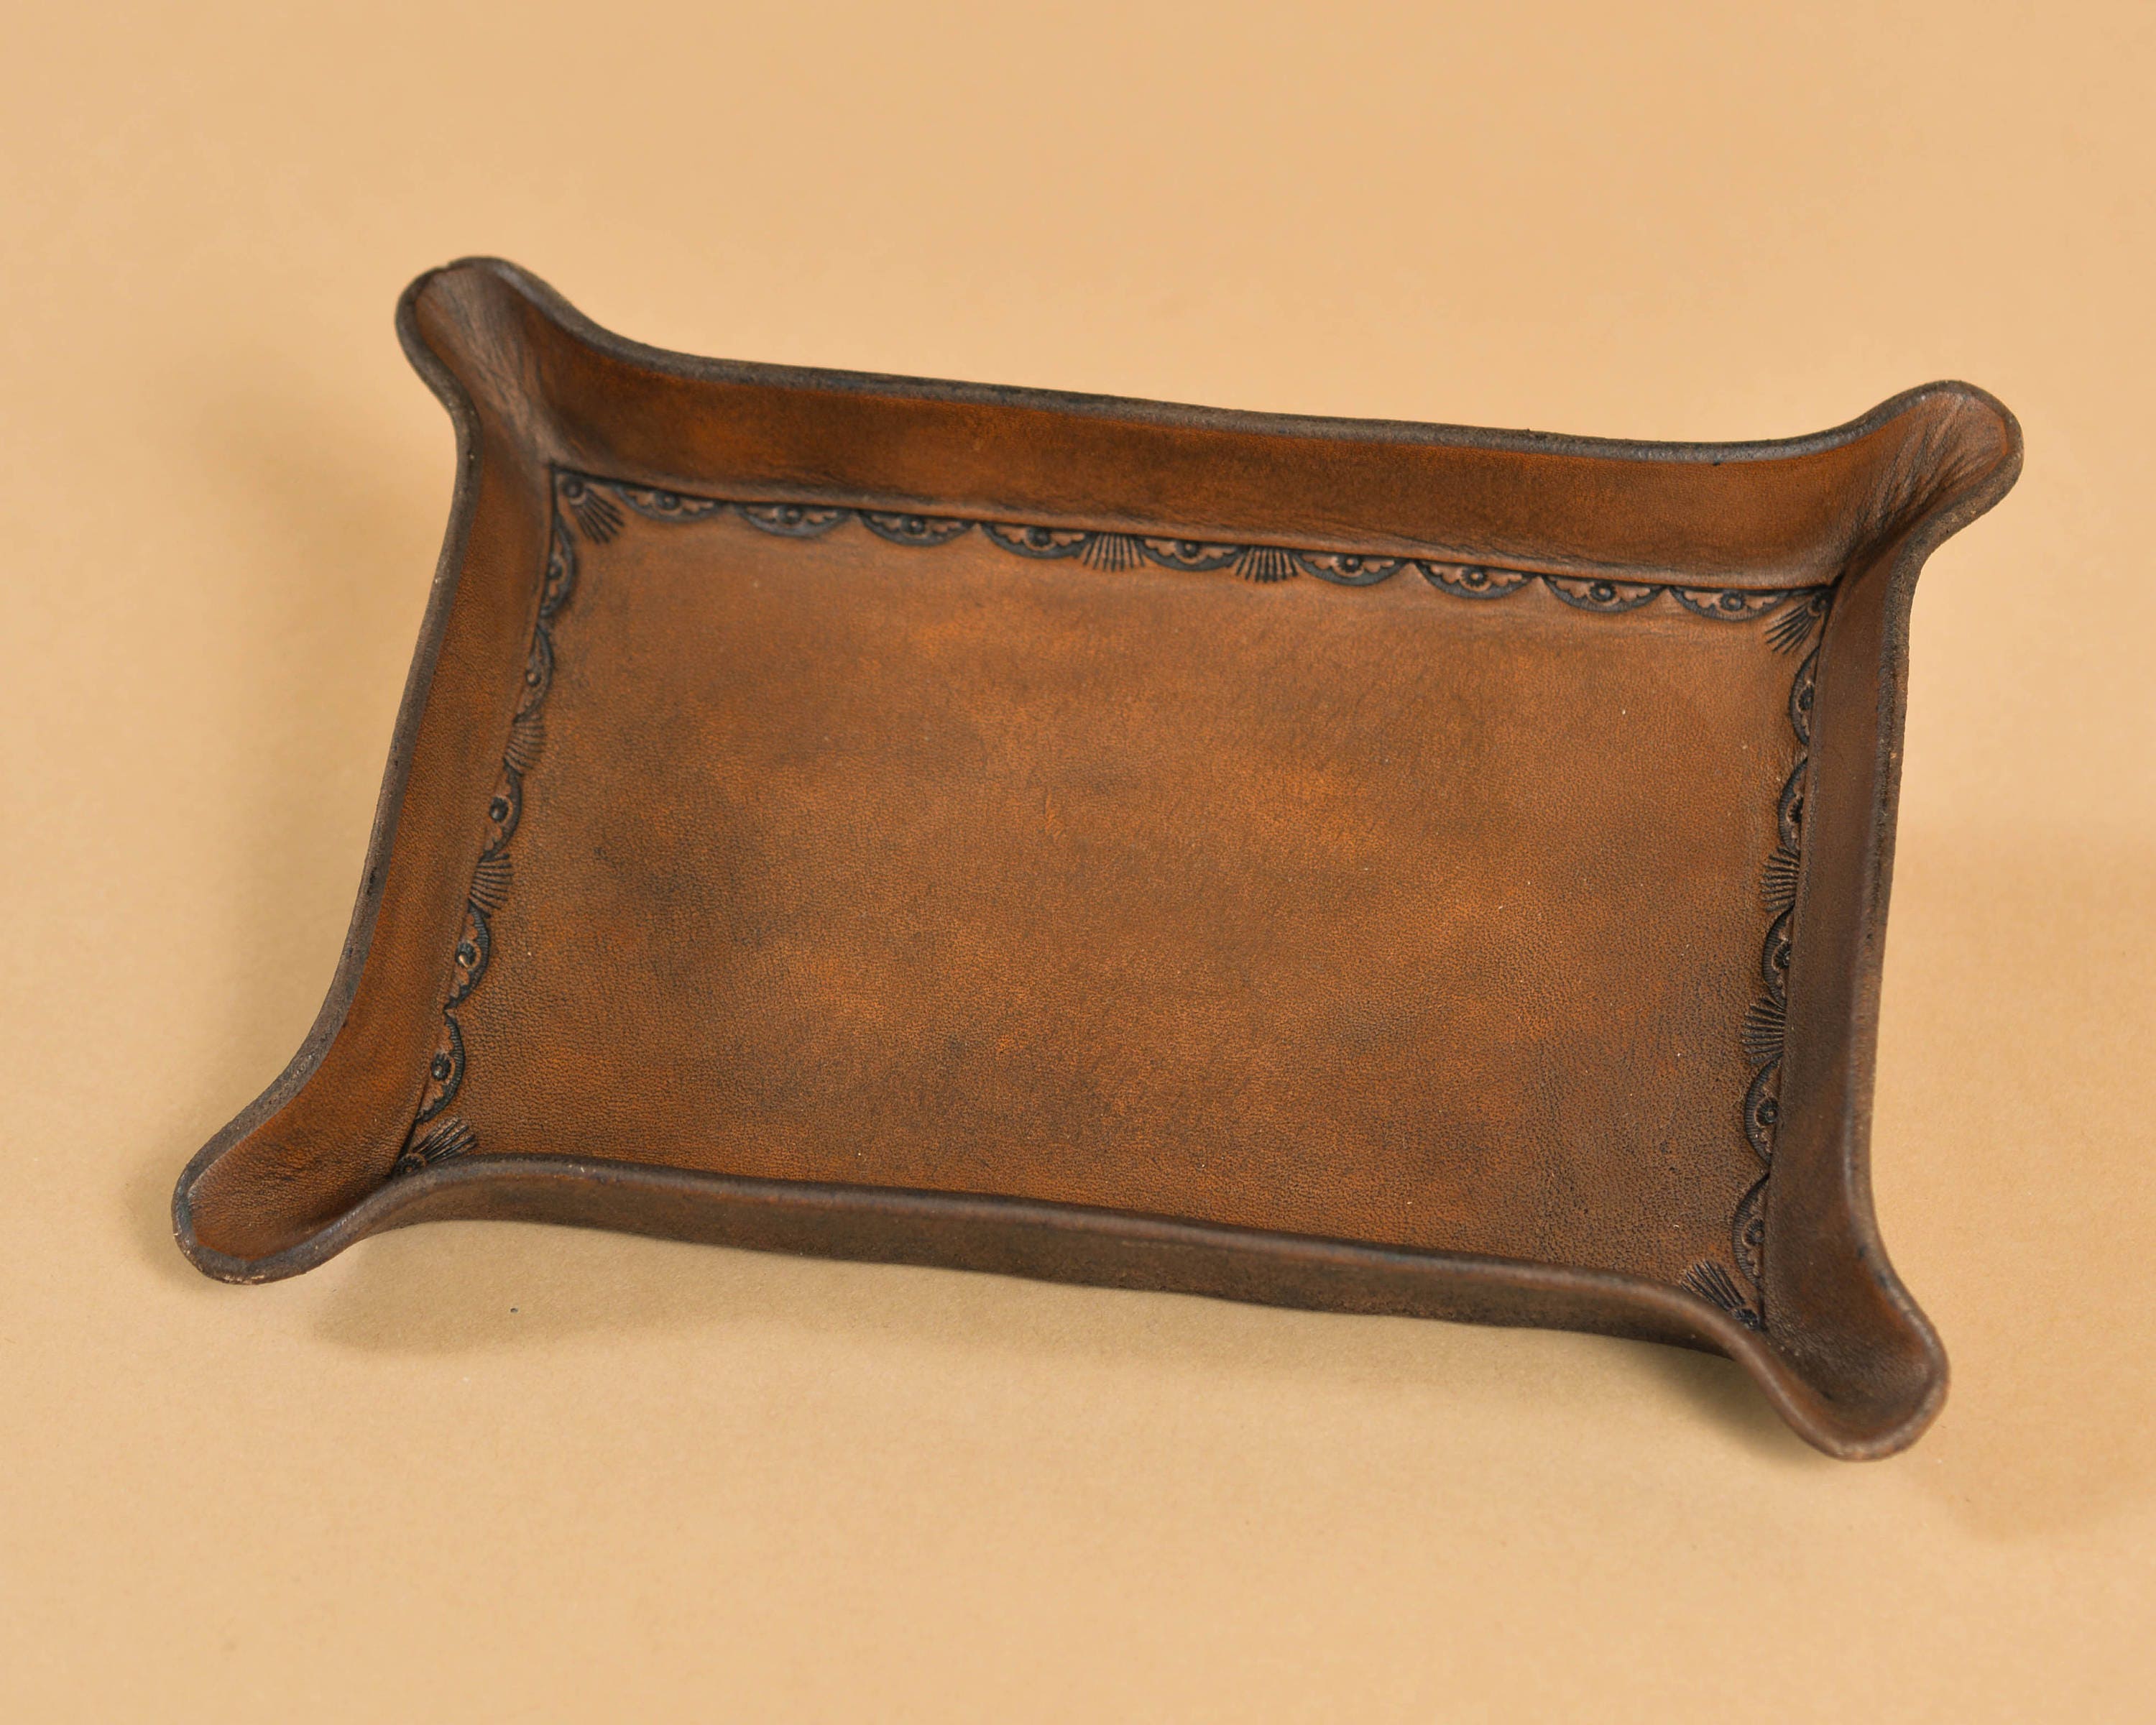 Bordered Leather Valet Tray For Dresser Or Desk Ready To Ship